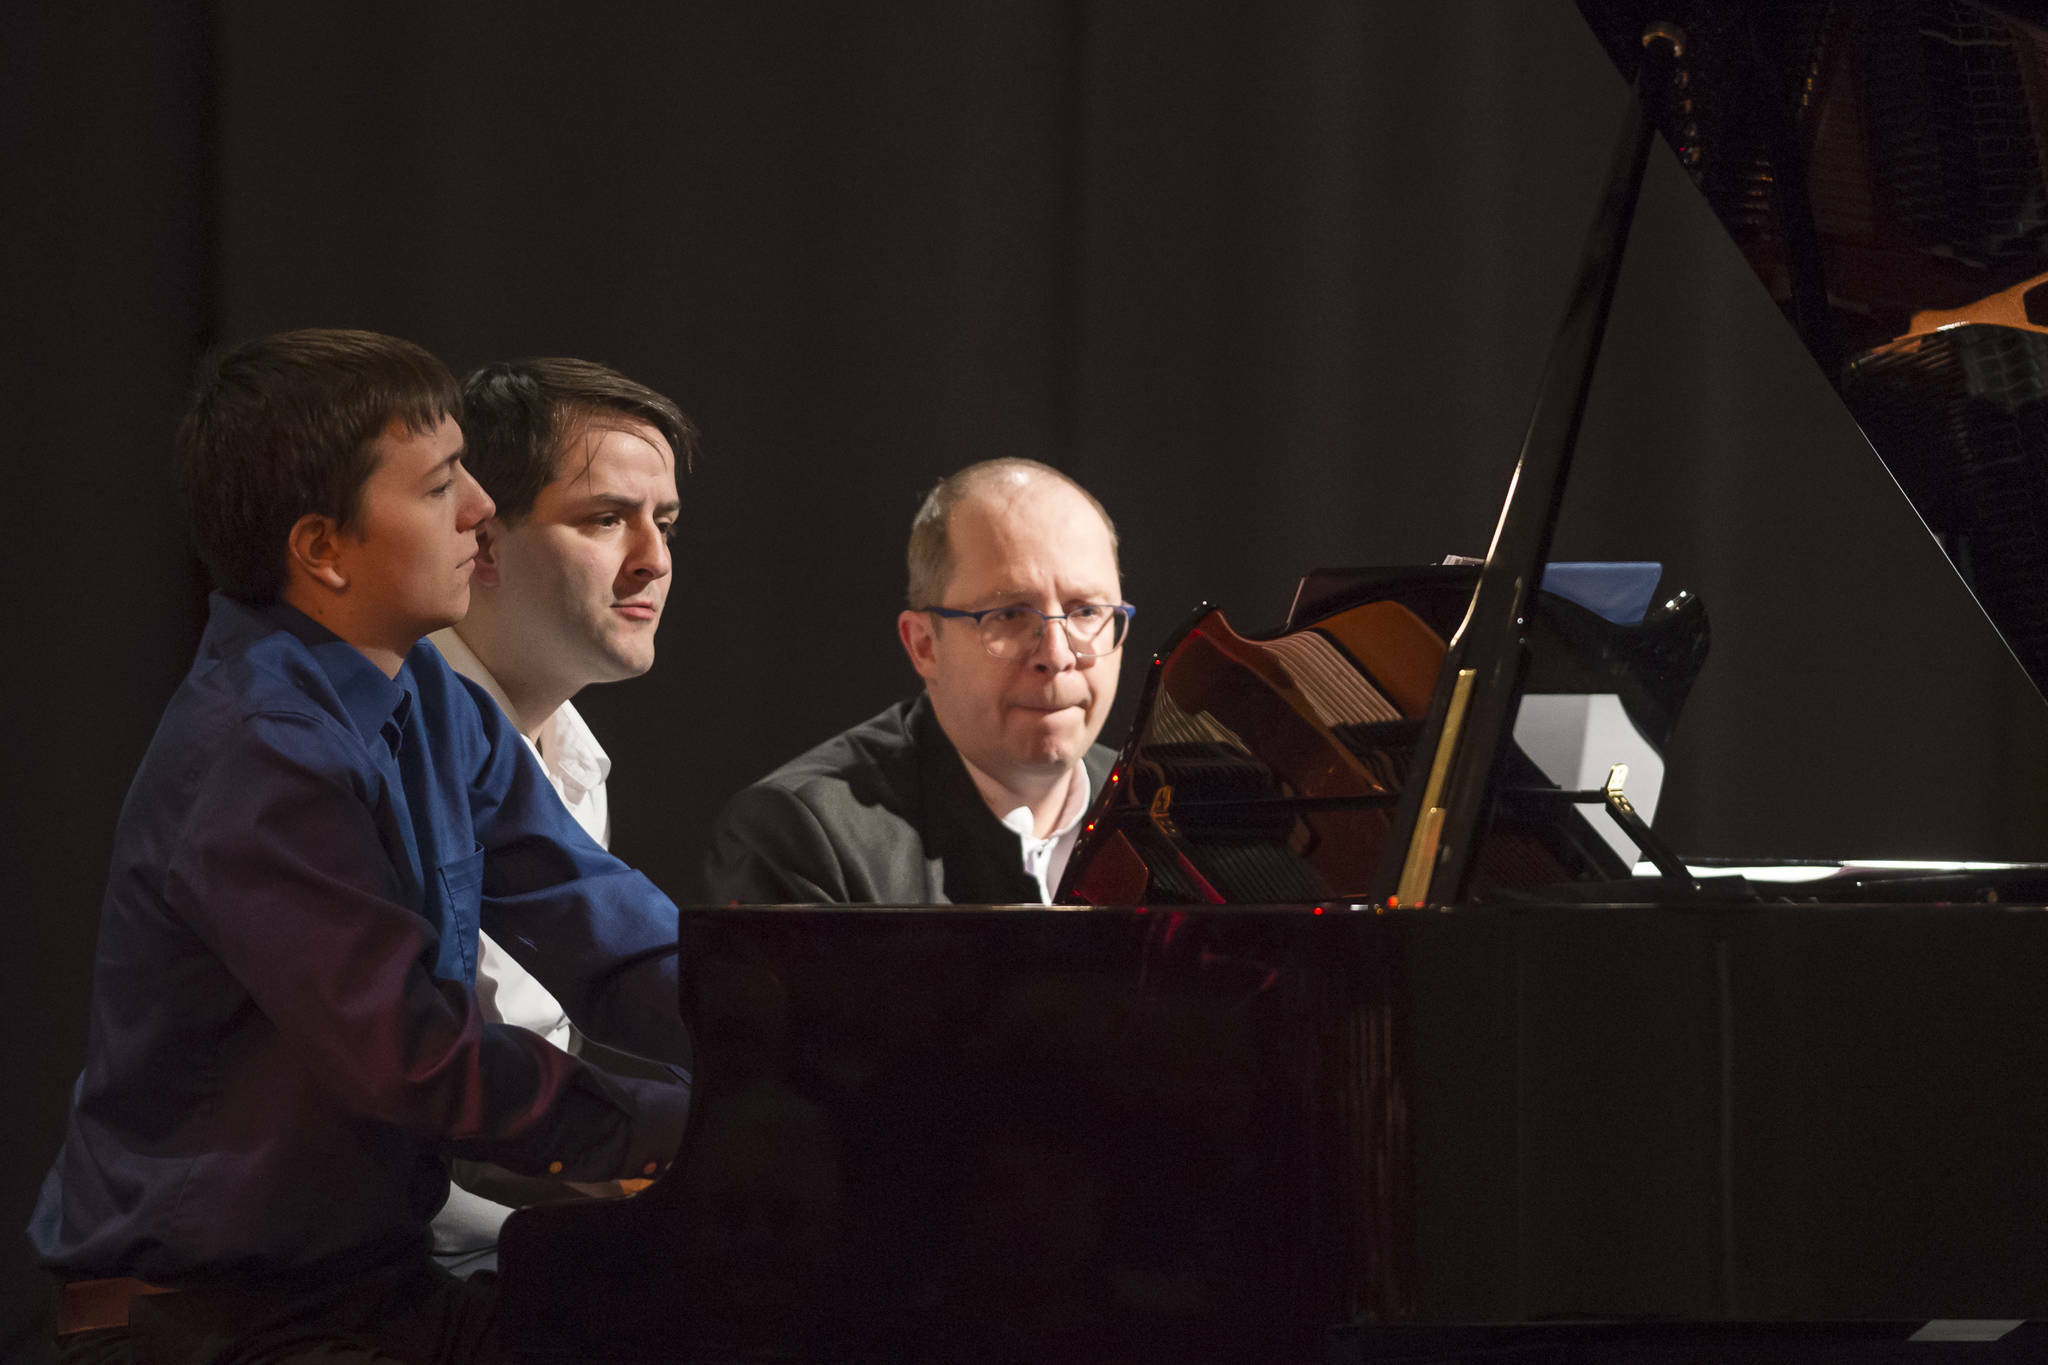 Kyle Farley-Robinson, left, Jon Hays, center, and Dr. Alexander Tutunov play “Romance And Waltz For Six Hands Piano” by Sergei Rachmaninoff during the Juneau Piano Series featuring Dr. Tutunov at the Juneau Arts and Culture Center on Friday, Jan. 18, 2019. (Michael Penn / Juneau Empire File)